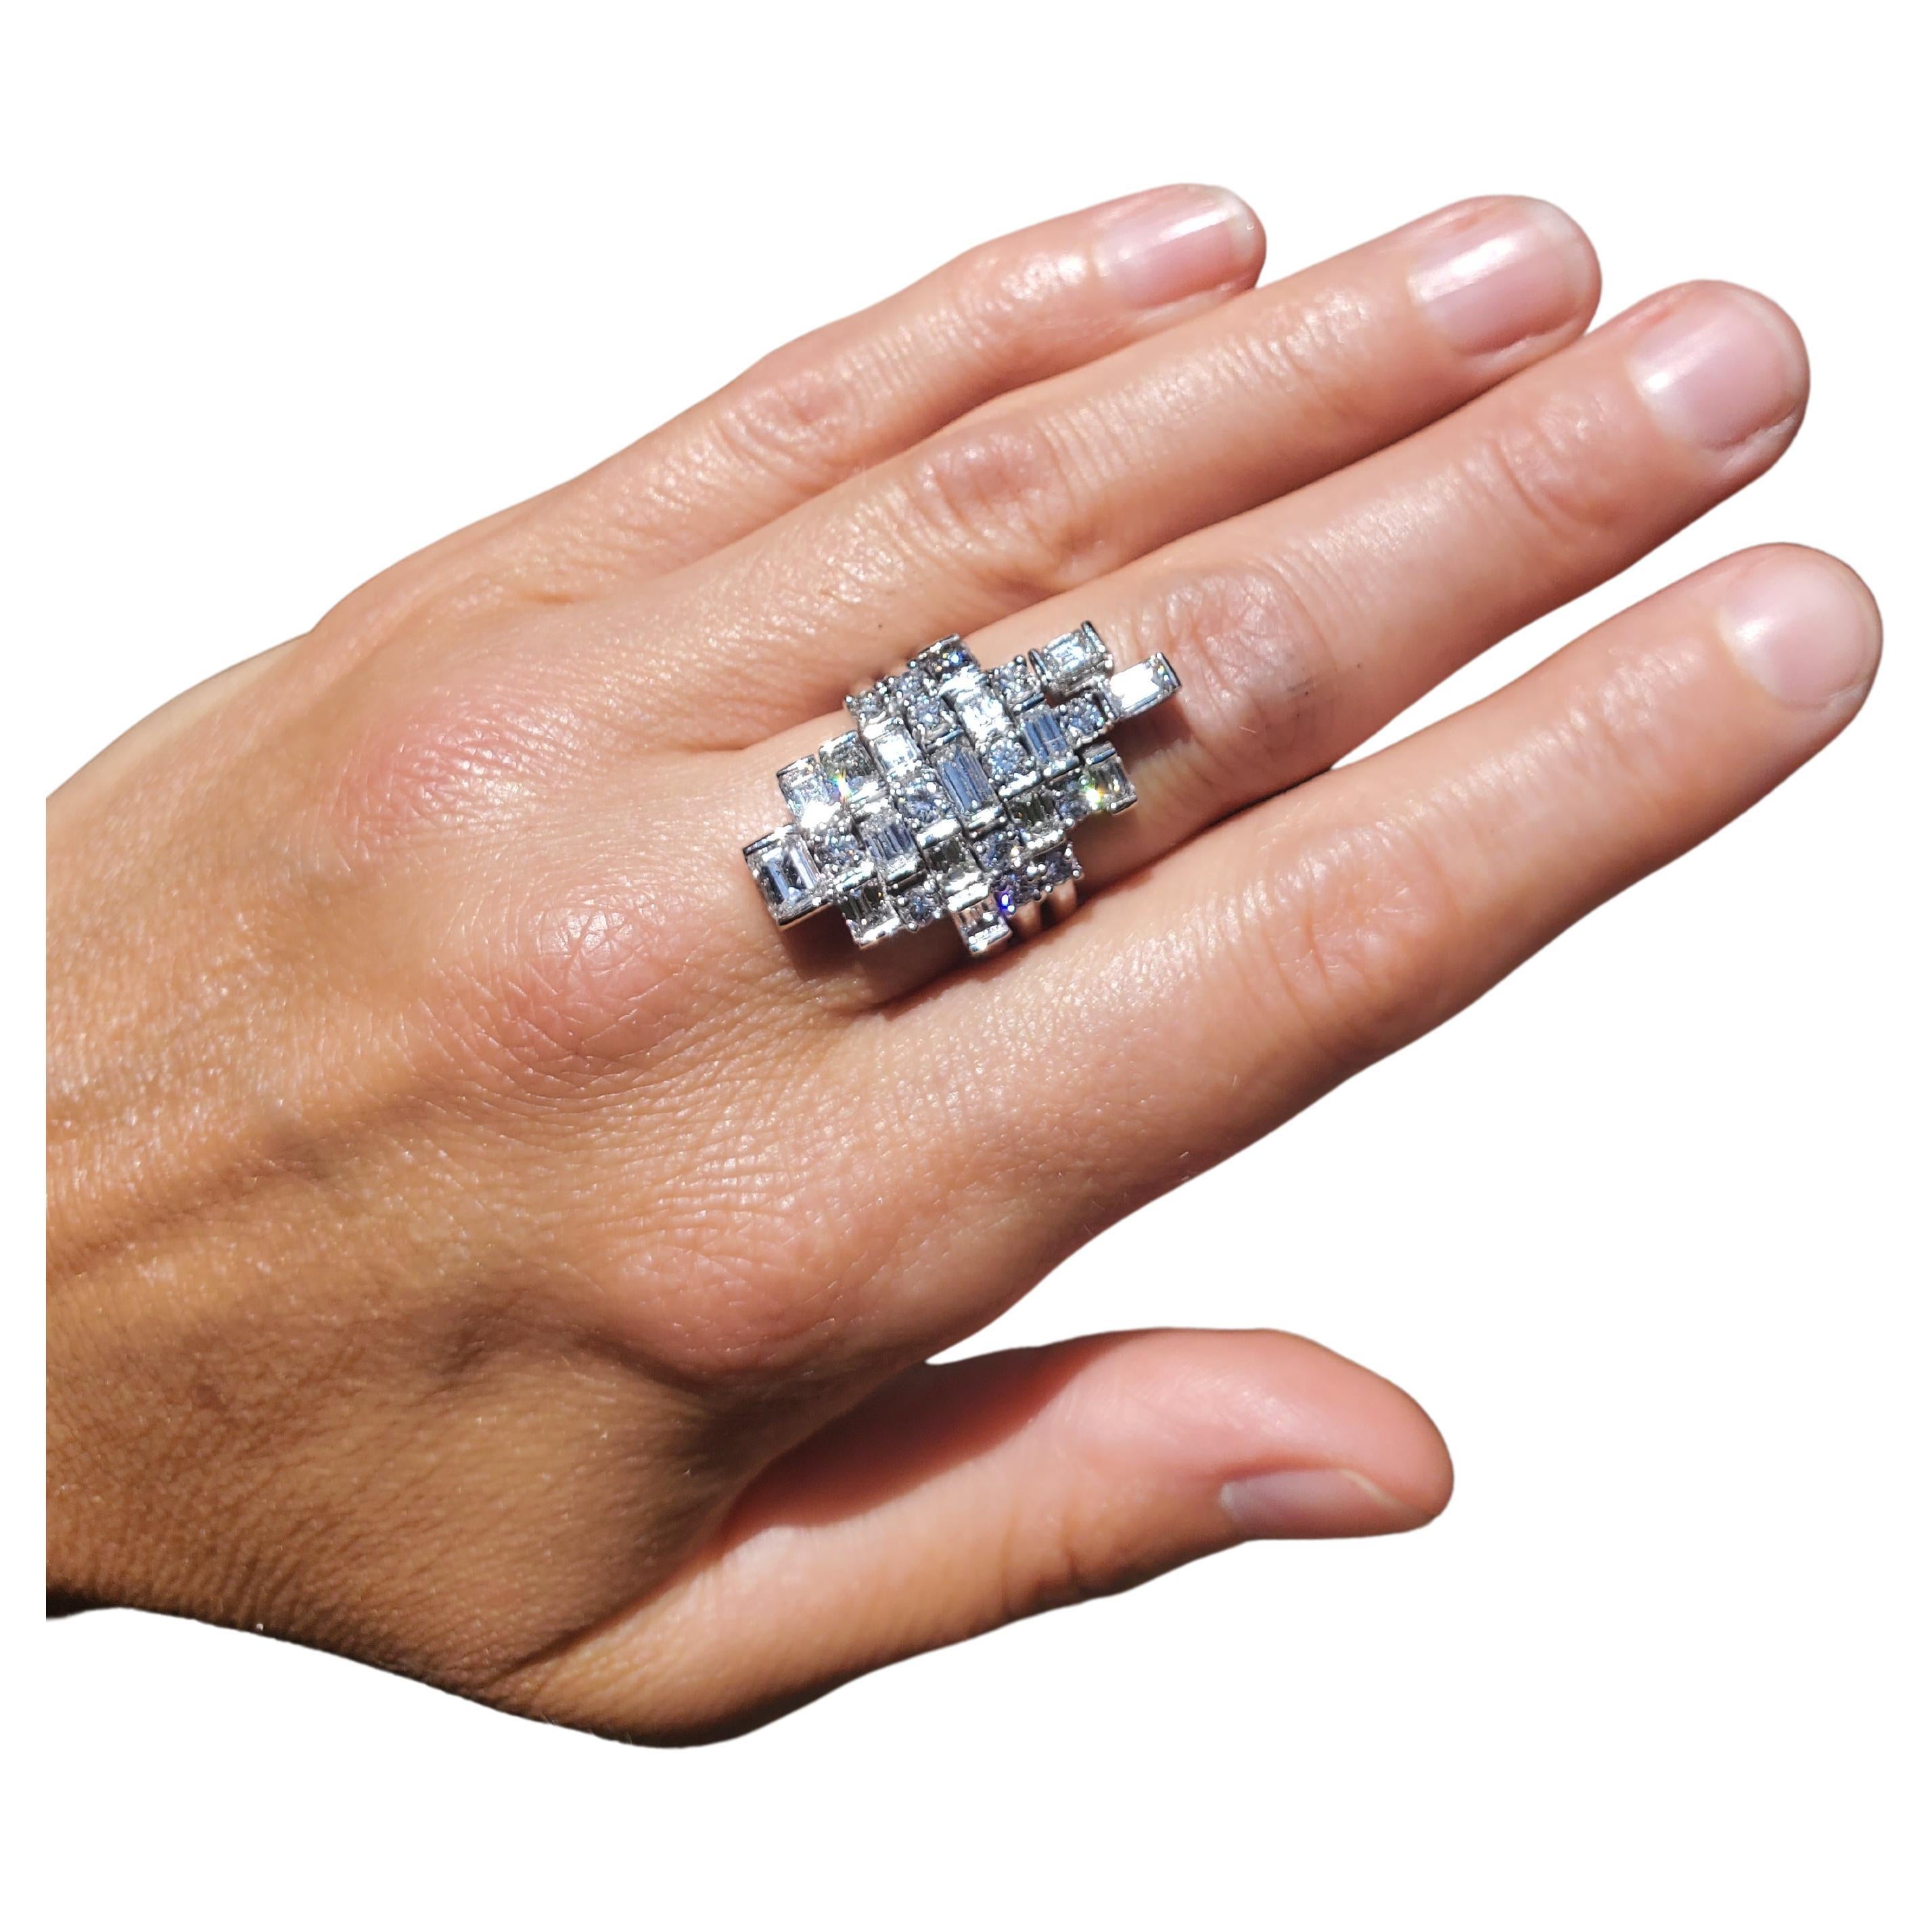 Emerald-Cut and Brilliant-Cut Diamonds=4.55cts, Platinum Ring Limited Edition